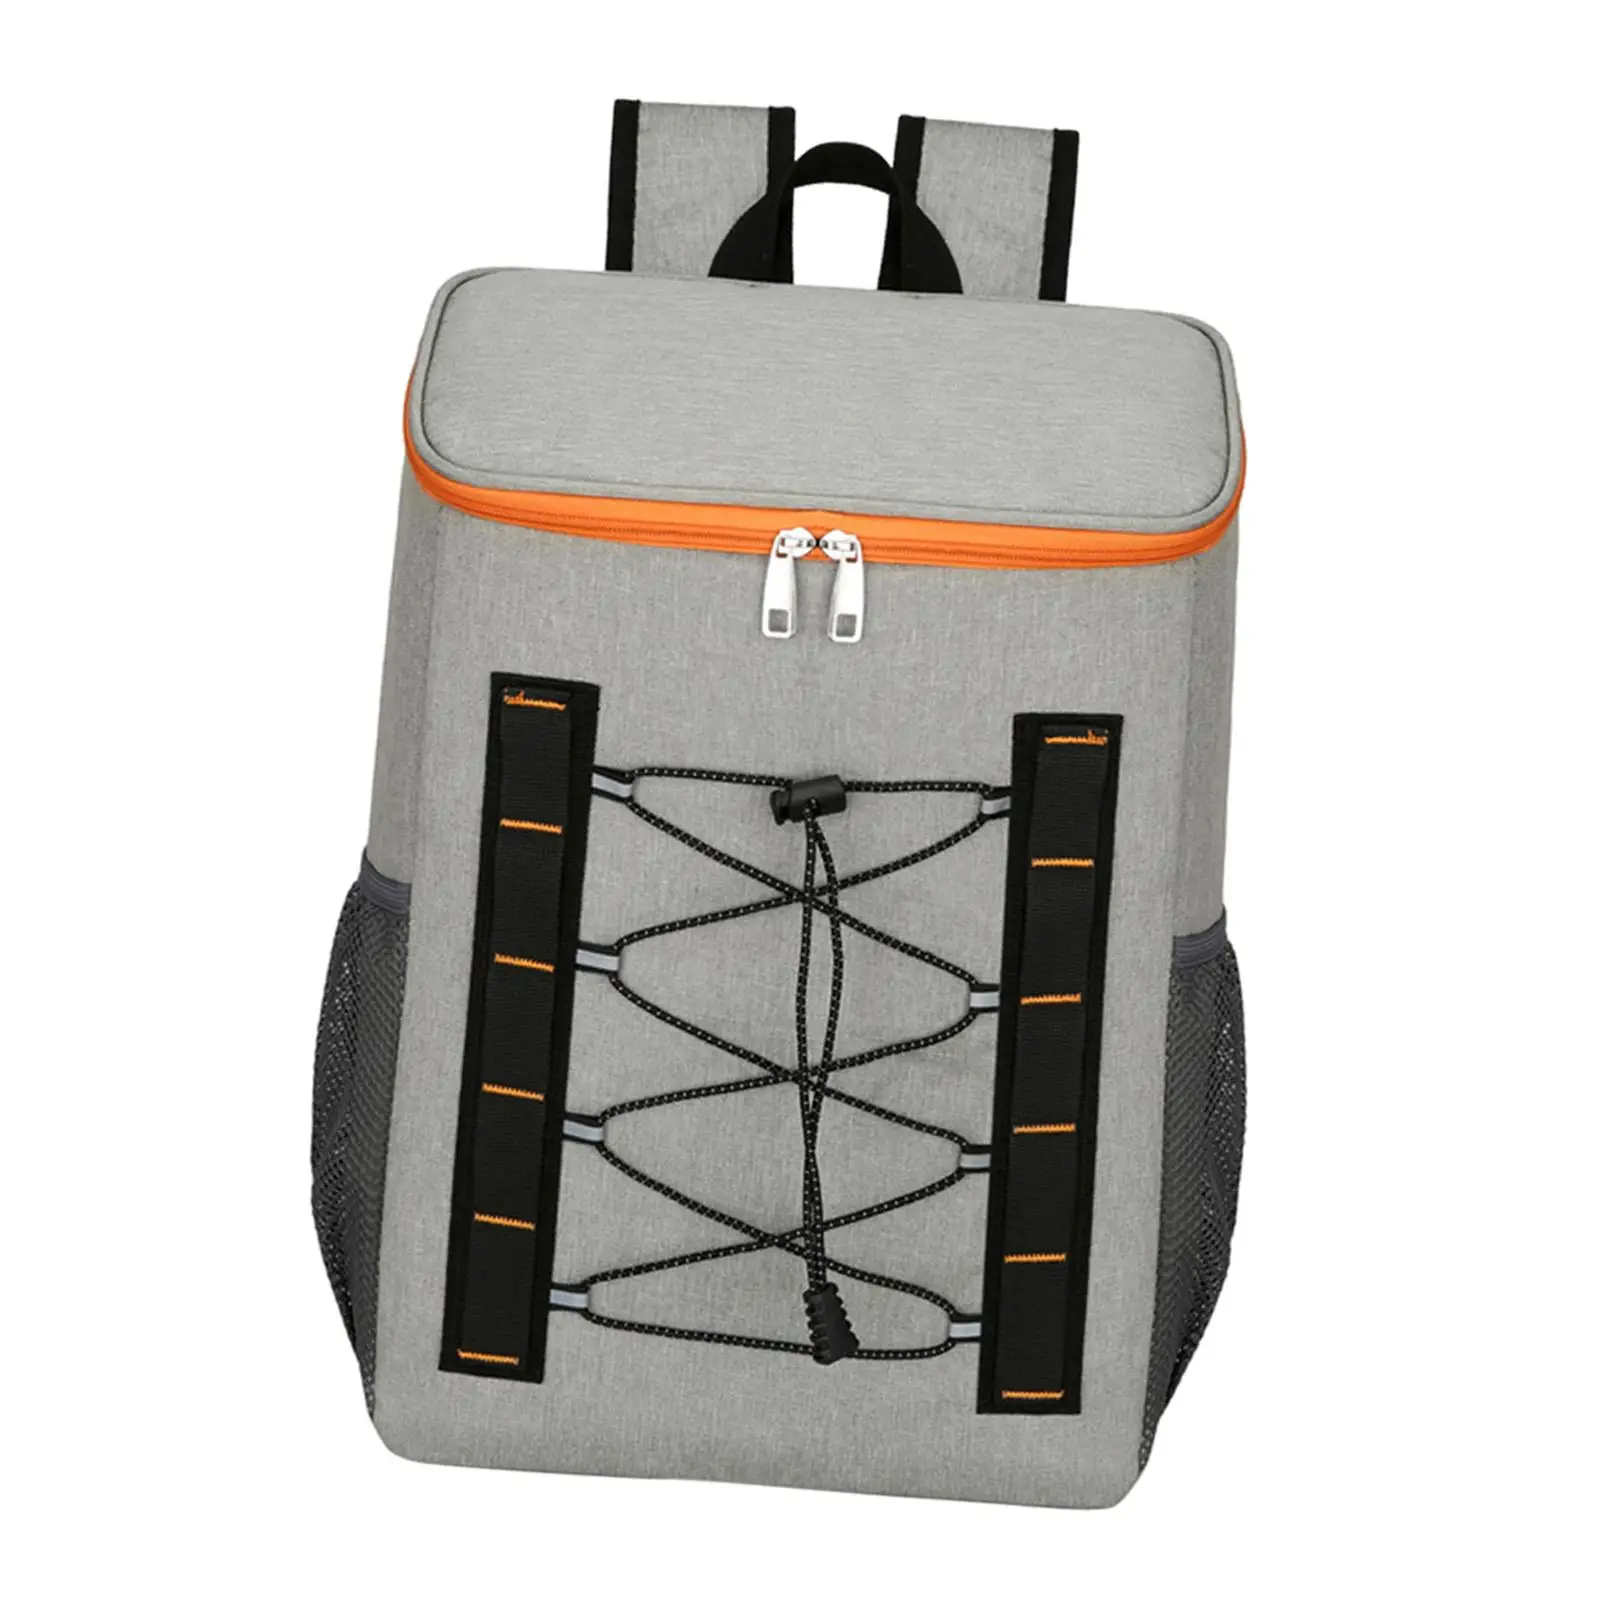 Outdoor Picnic Bag Cooler Bag Thermal Bag Insulated Lunch Backpack for Beach